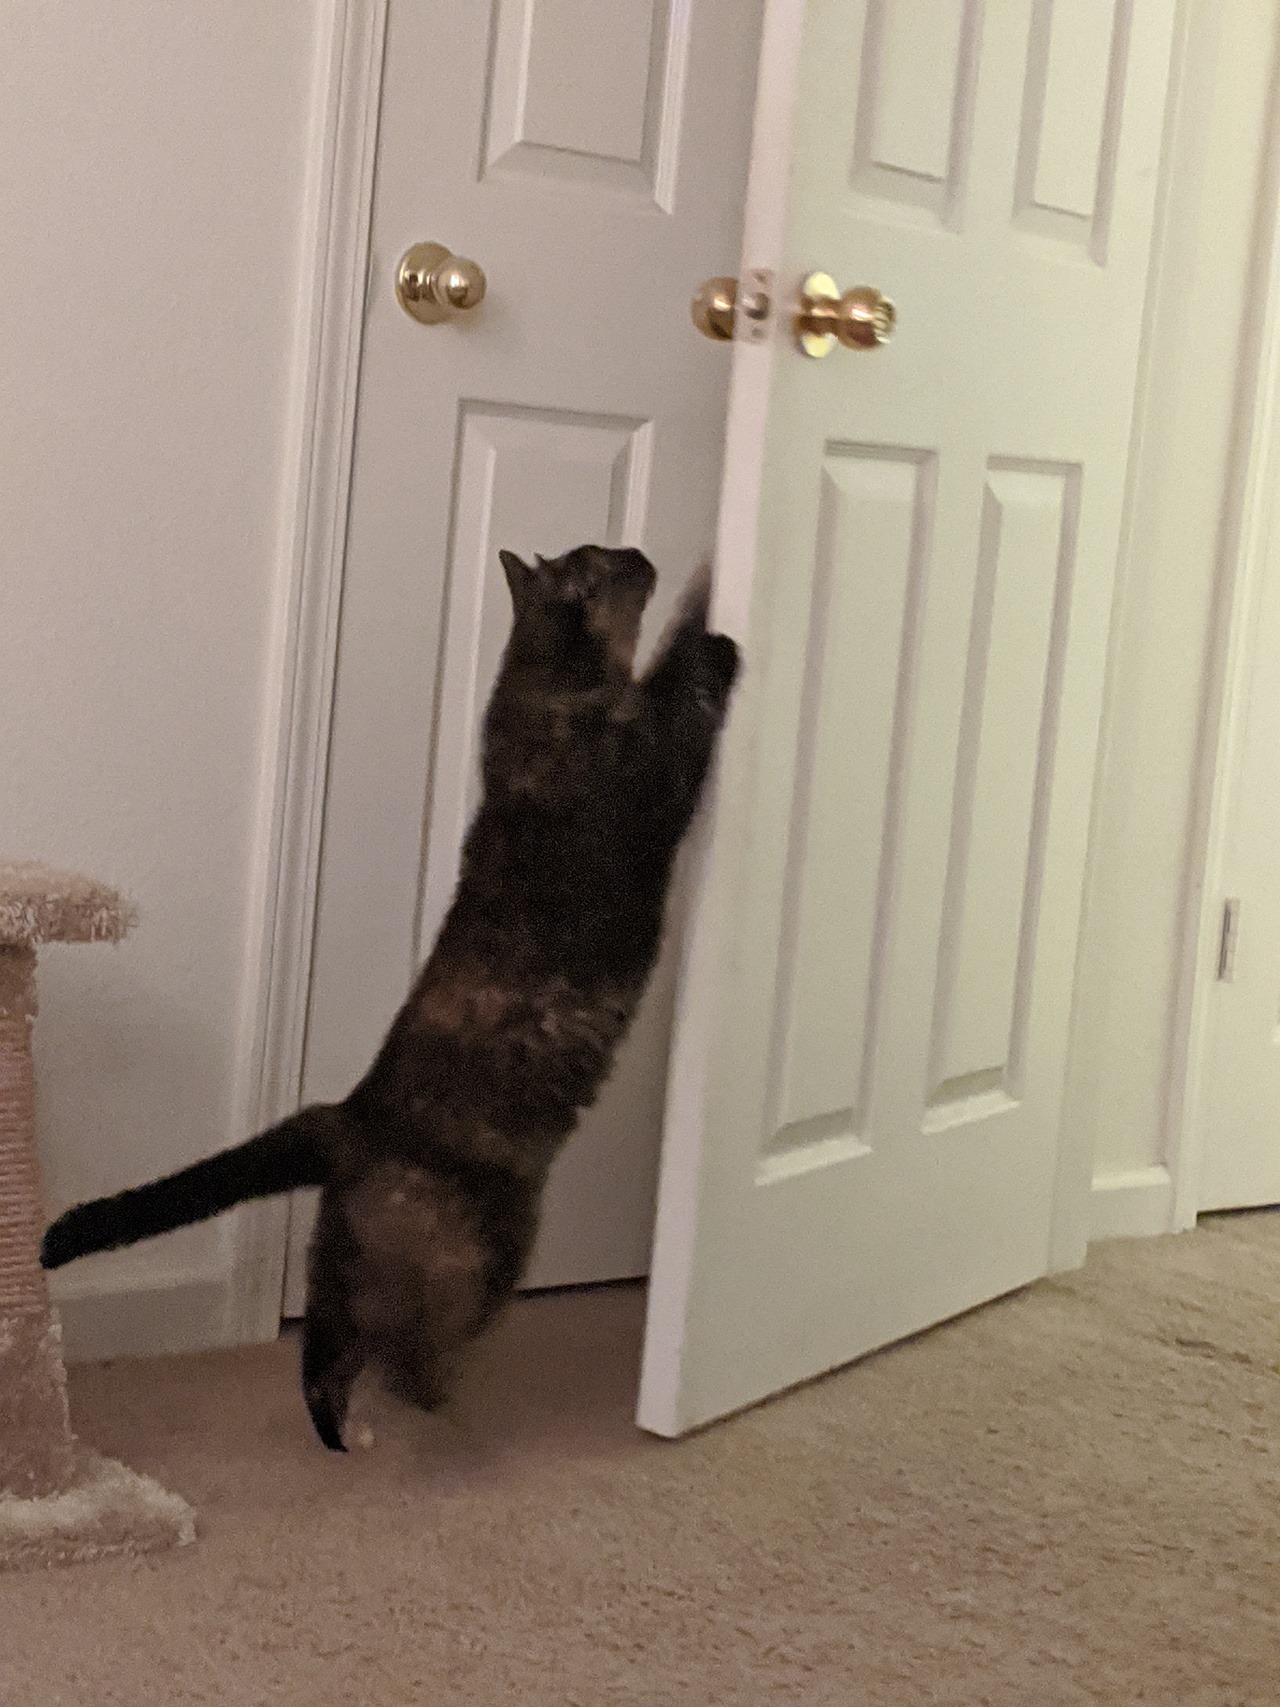 My new cat had a fascination with doors and she’s pretty funny.